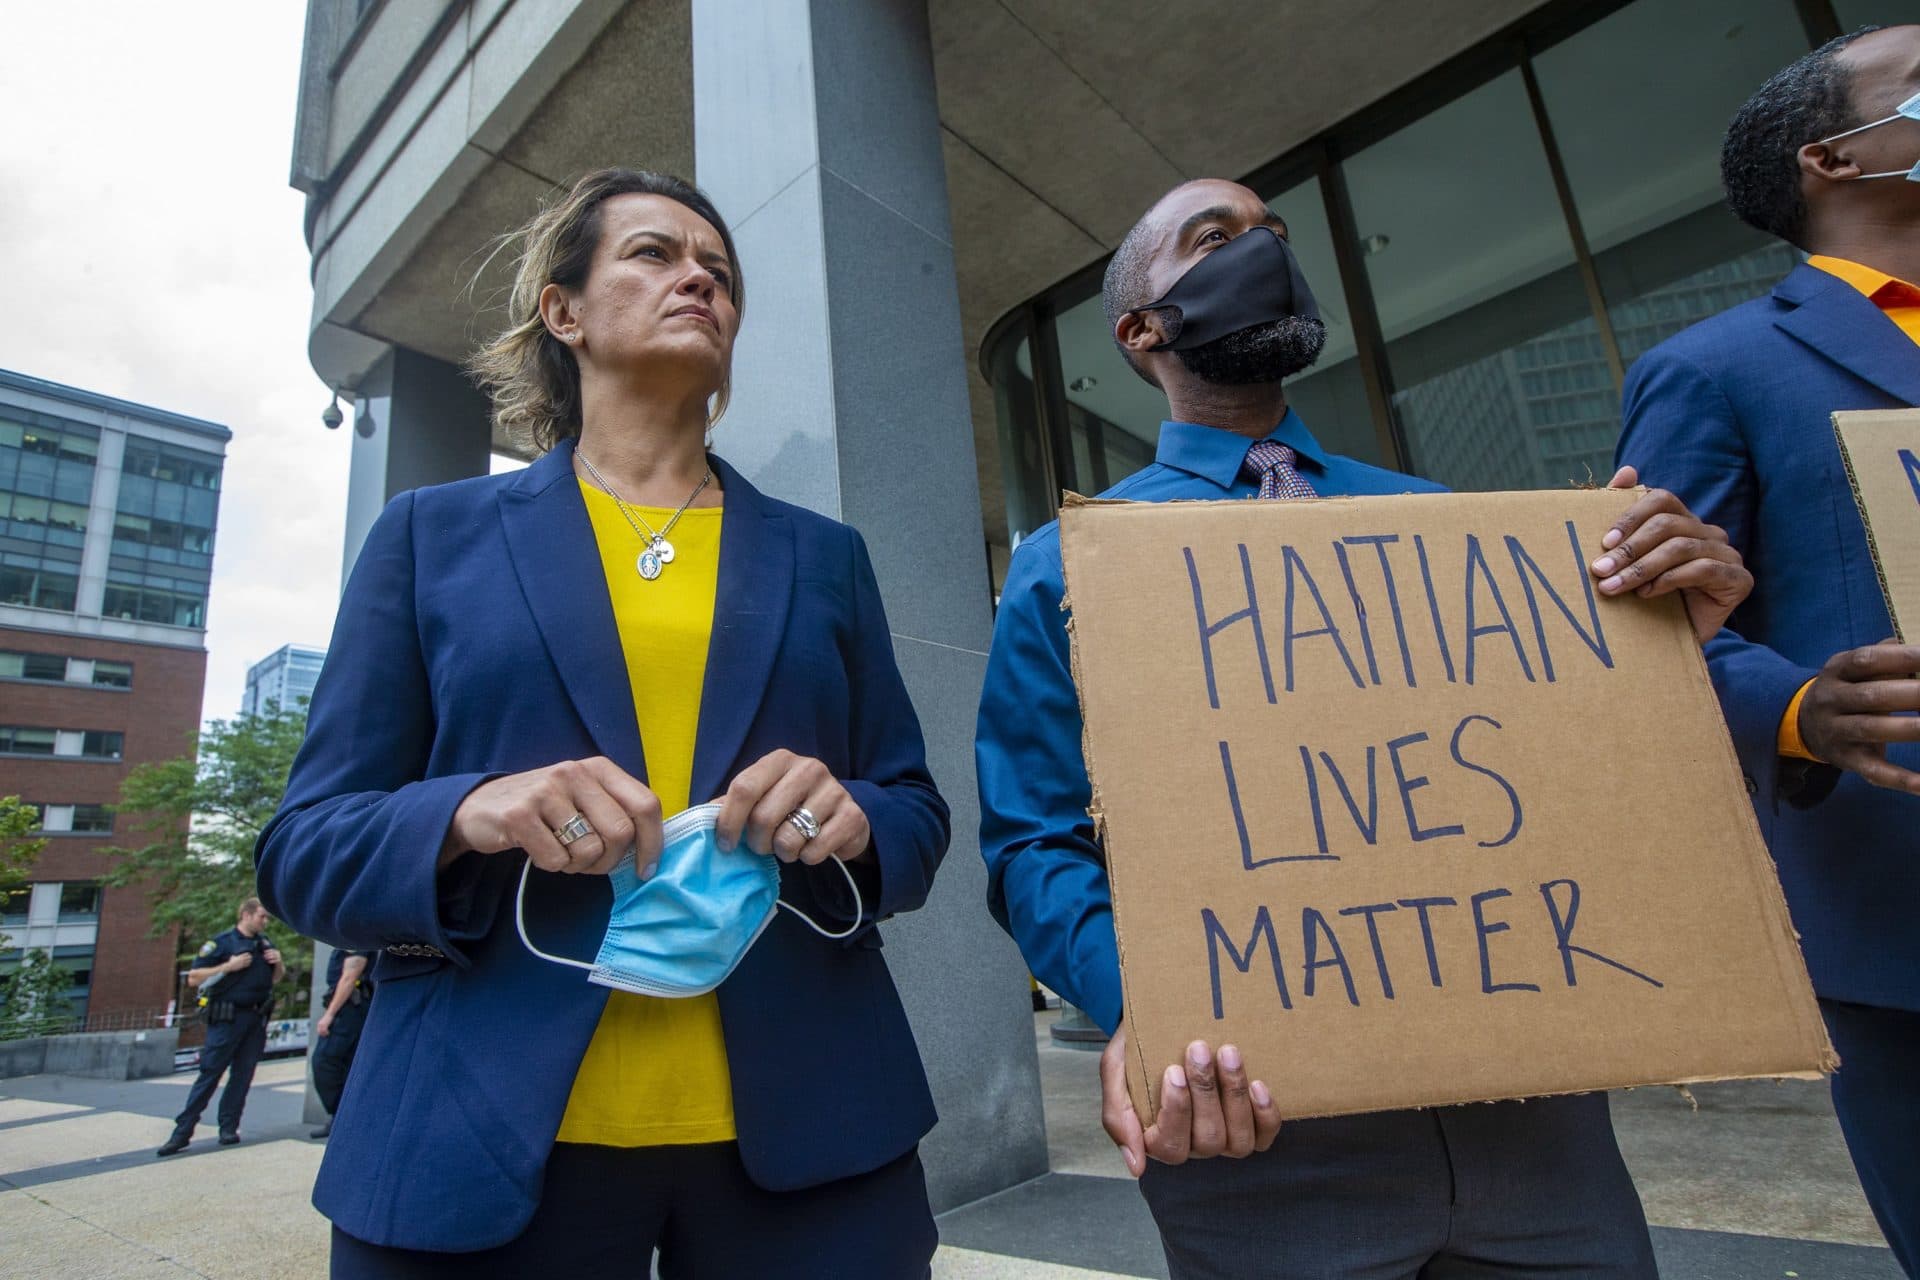 Boston City Councilor and mayoral candidate Annissa Essaibi George attended the Solidarity with Haiti demonstration at John F. Kennedy Federal Building in Downtown Boston. (Jesse Costa/WBUR)